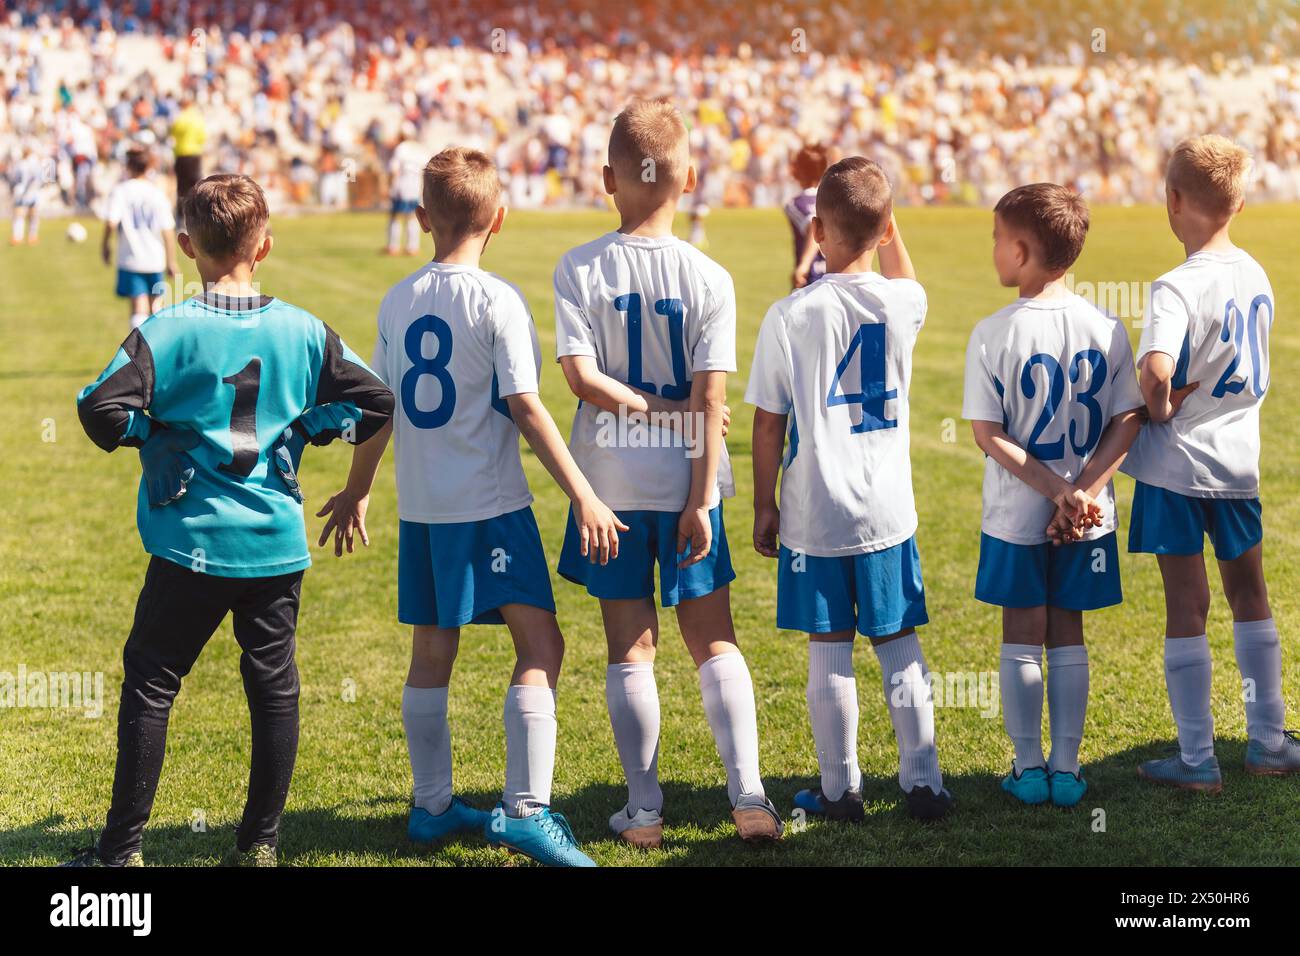 Football Academy Youth Team. Group of Soccer Boys in School Team. Players Watching the Match and Ready To Play the Game. Kids in Soccer Jerseys Play t Stock Photo